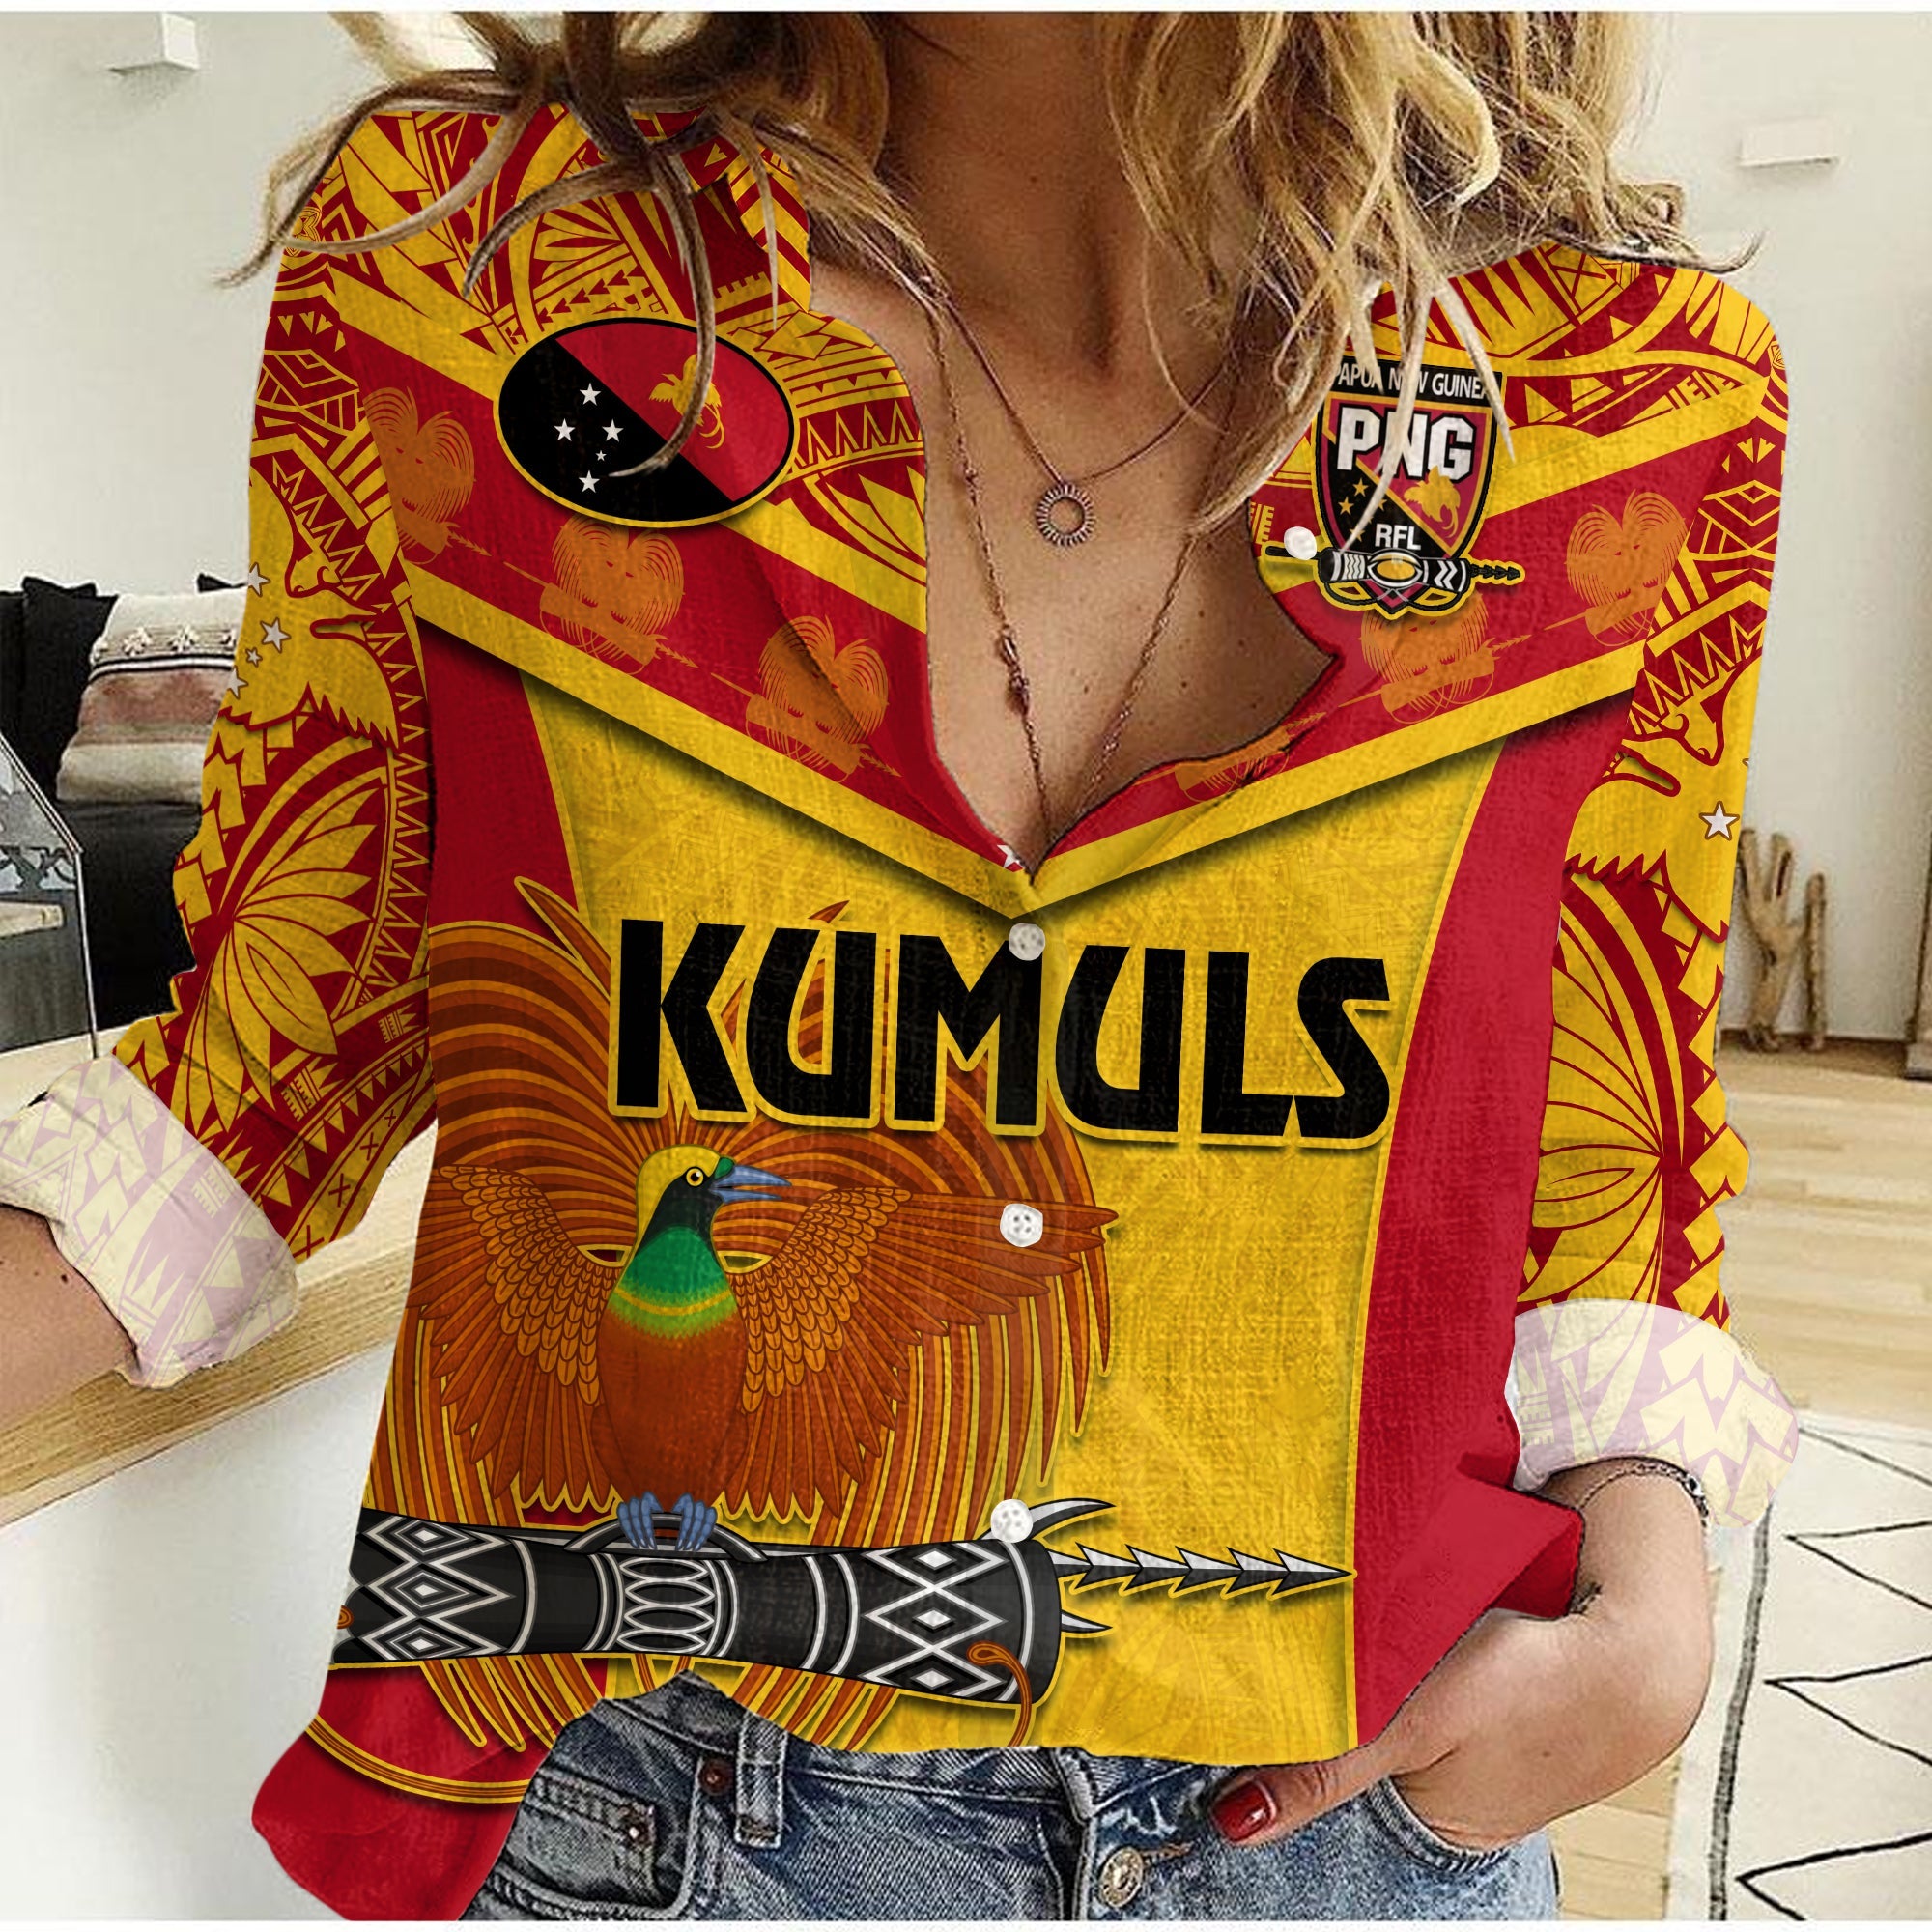 (Custom Text And Number) Papua New Guinea Rugby Women Casual Shirt PNG Kumuls Bird Of Paradise Yellow LT14 Female Yellow - Polynesian Pride